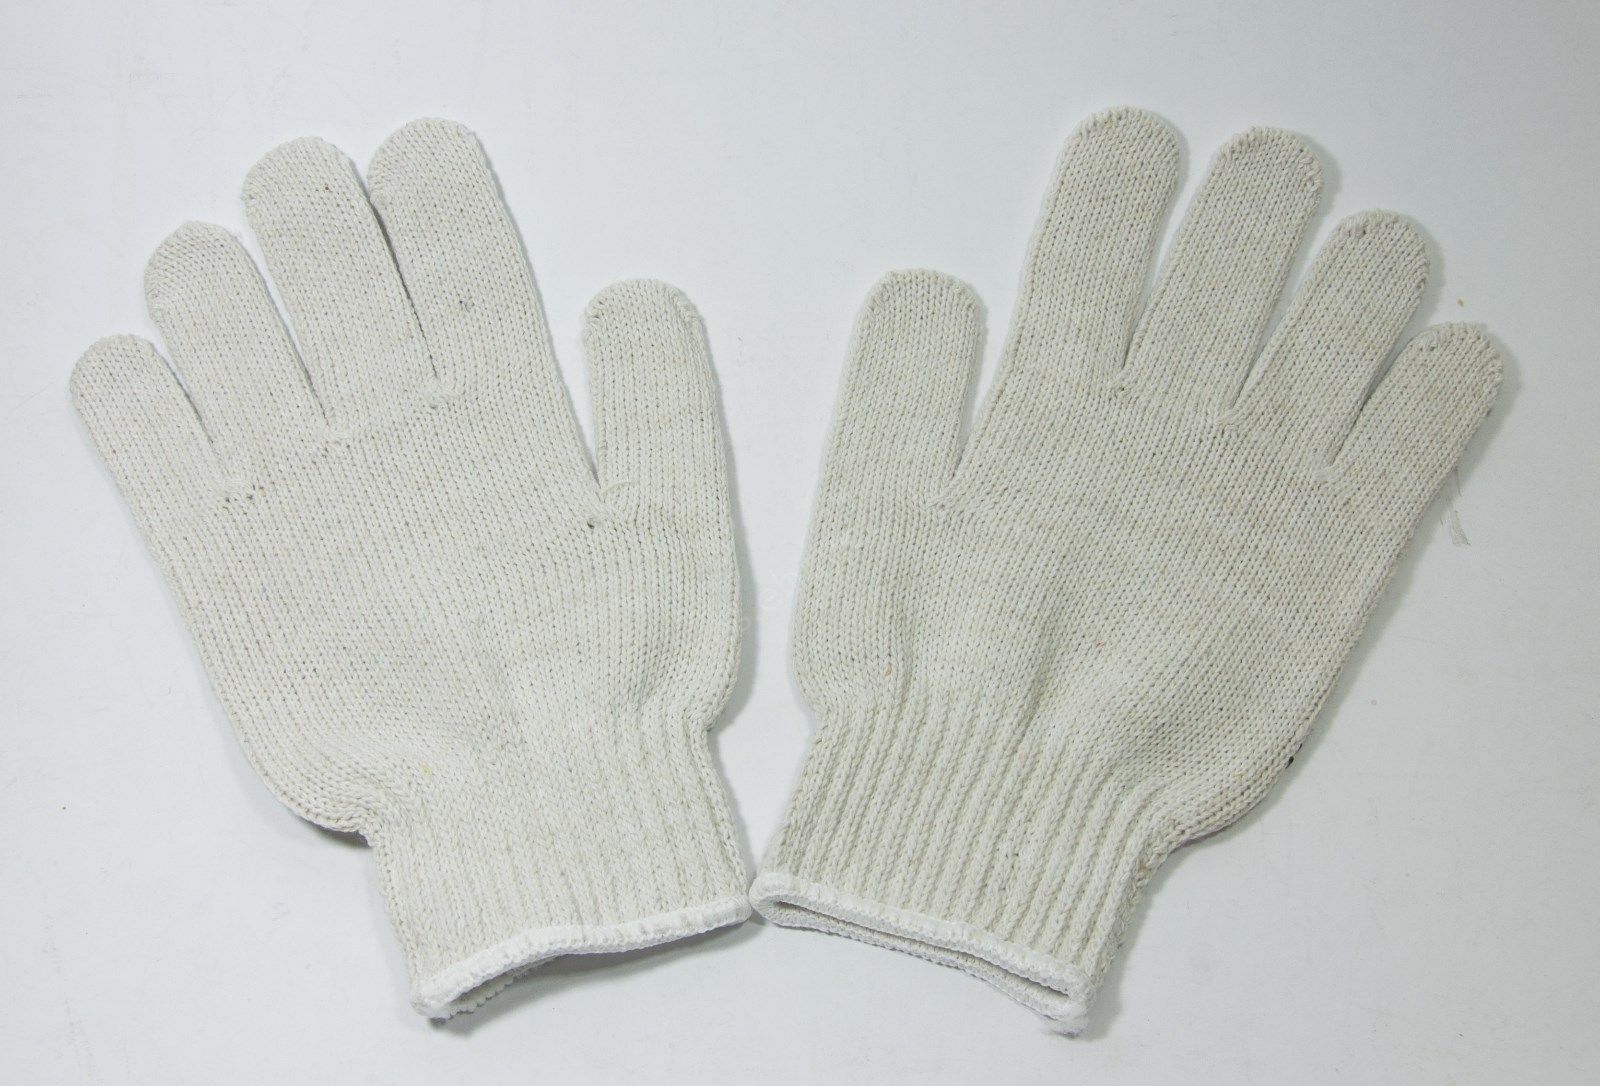 AUSTORE Dot Palm Glove For General Purpose Using 9025